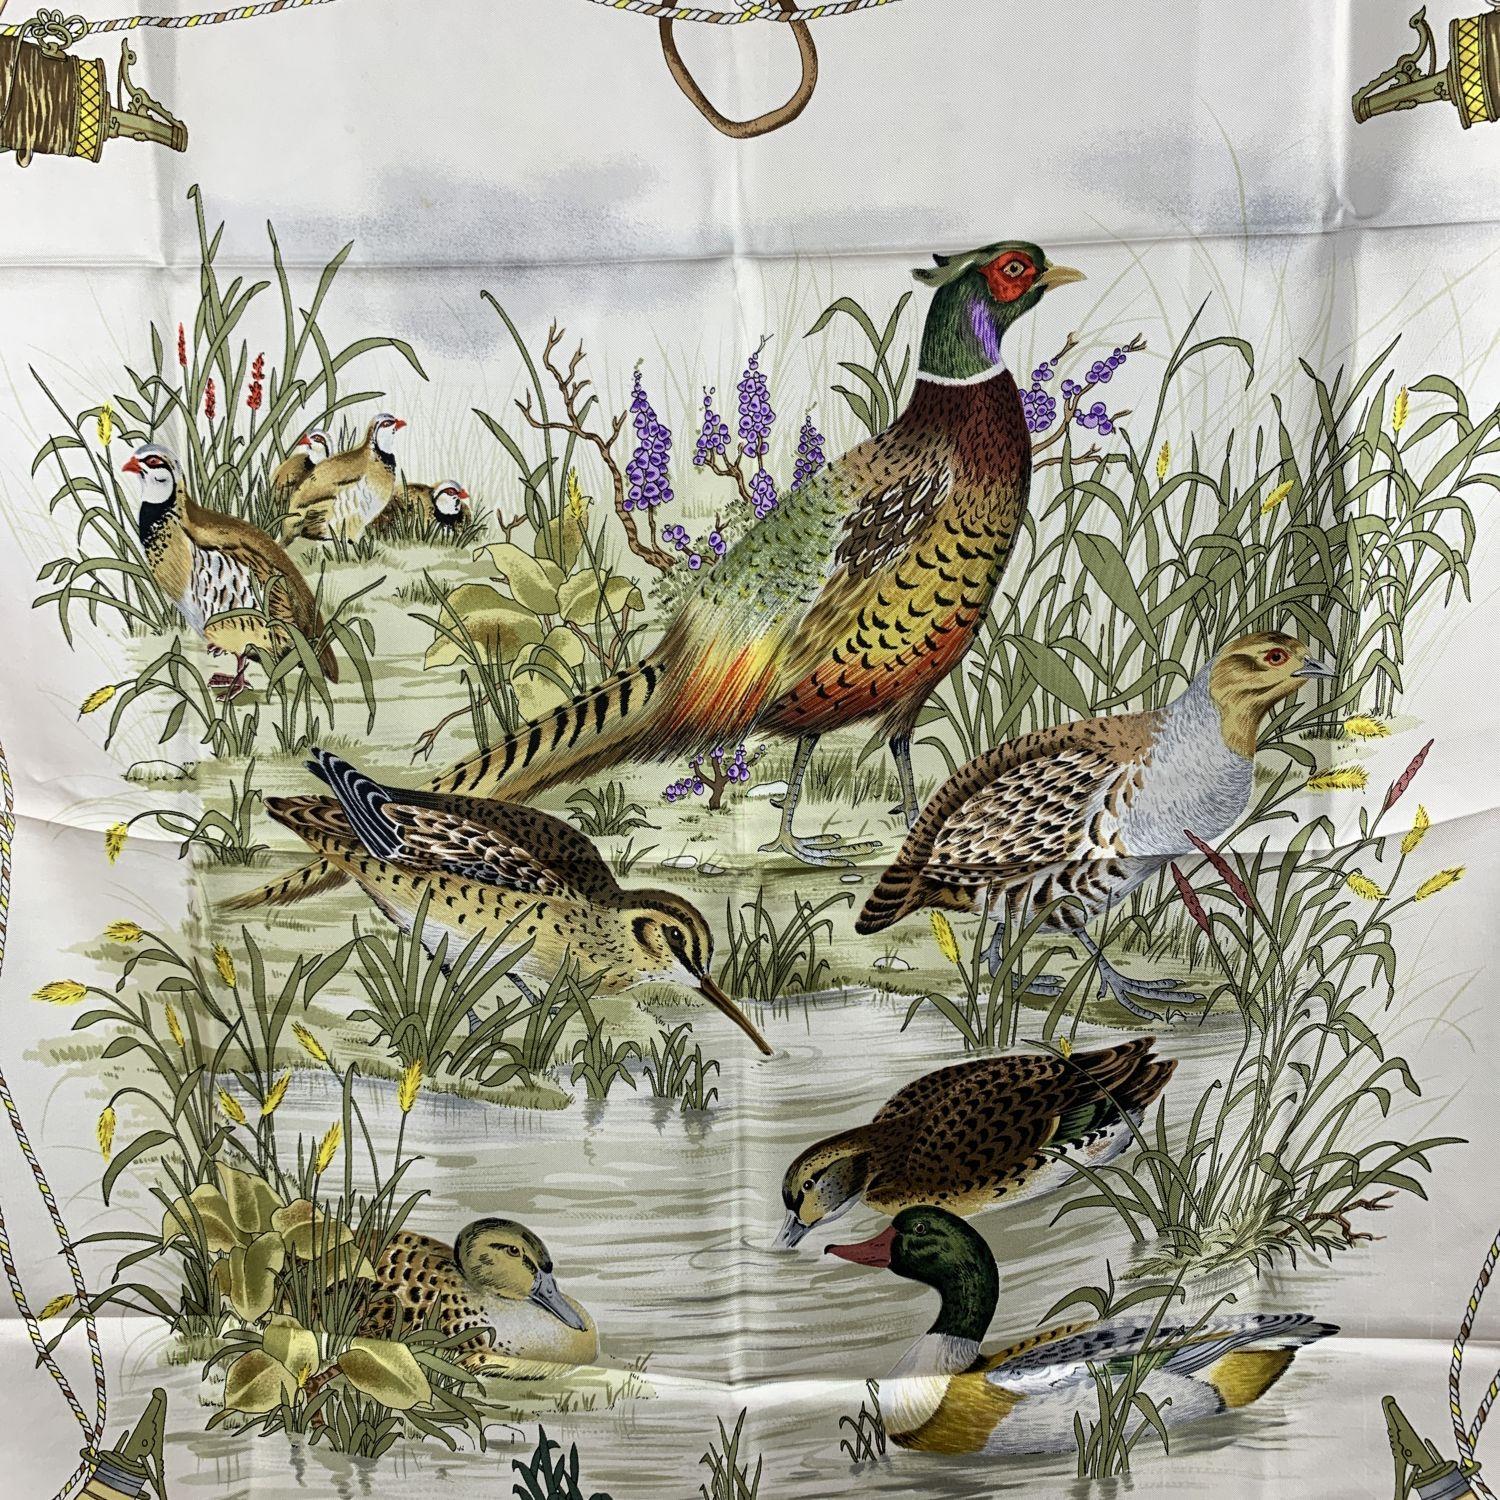 Beautiful Gucci vintage silk scarf with a beautiful ducks and pheasants design. Composition: 100% Silk. Burgundy borders. Gucci printed on the scarf. Measurements: 34 x 34 inches - 86.4 x 86.4 cm



Details

MATERIAL: Silk

COLOR: Burgundy

MODEL: